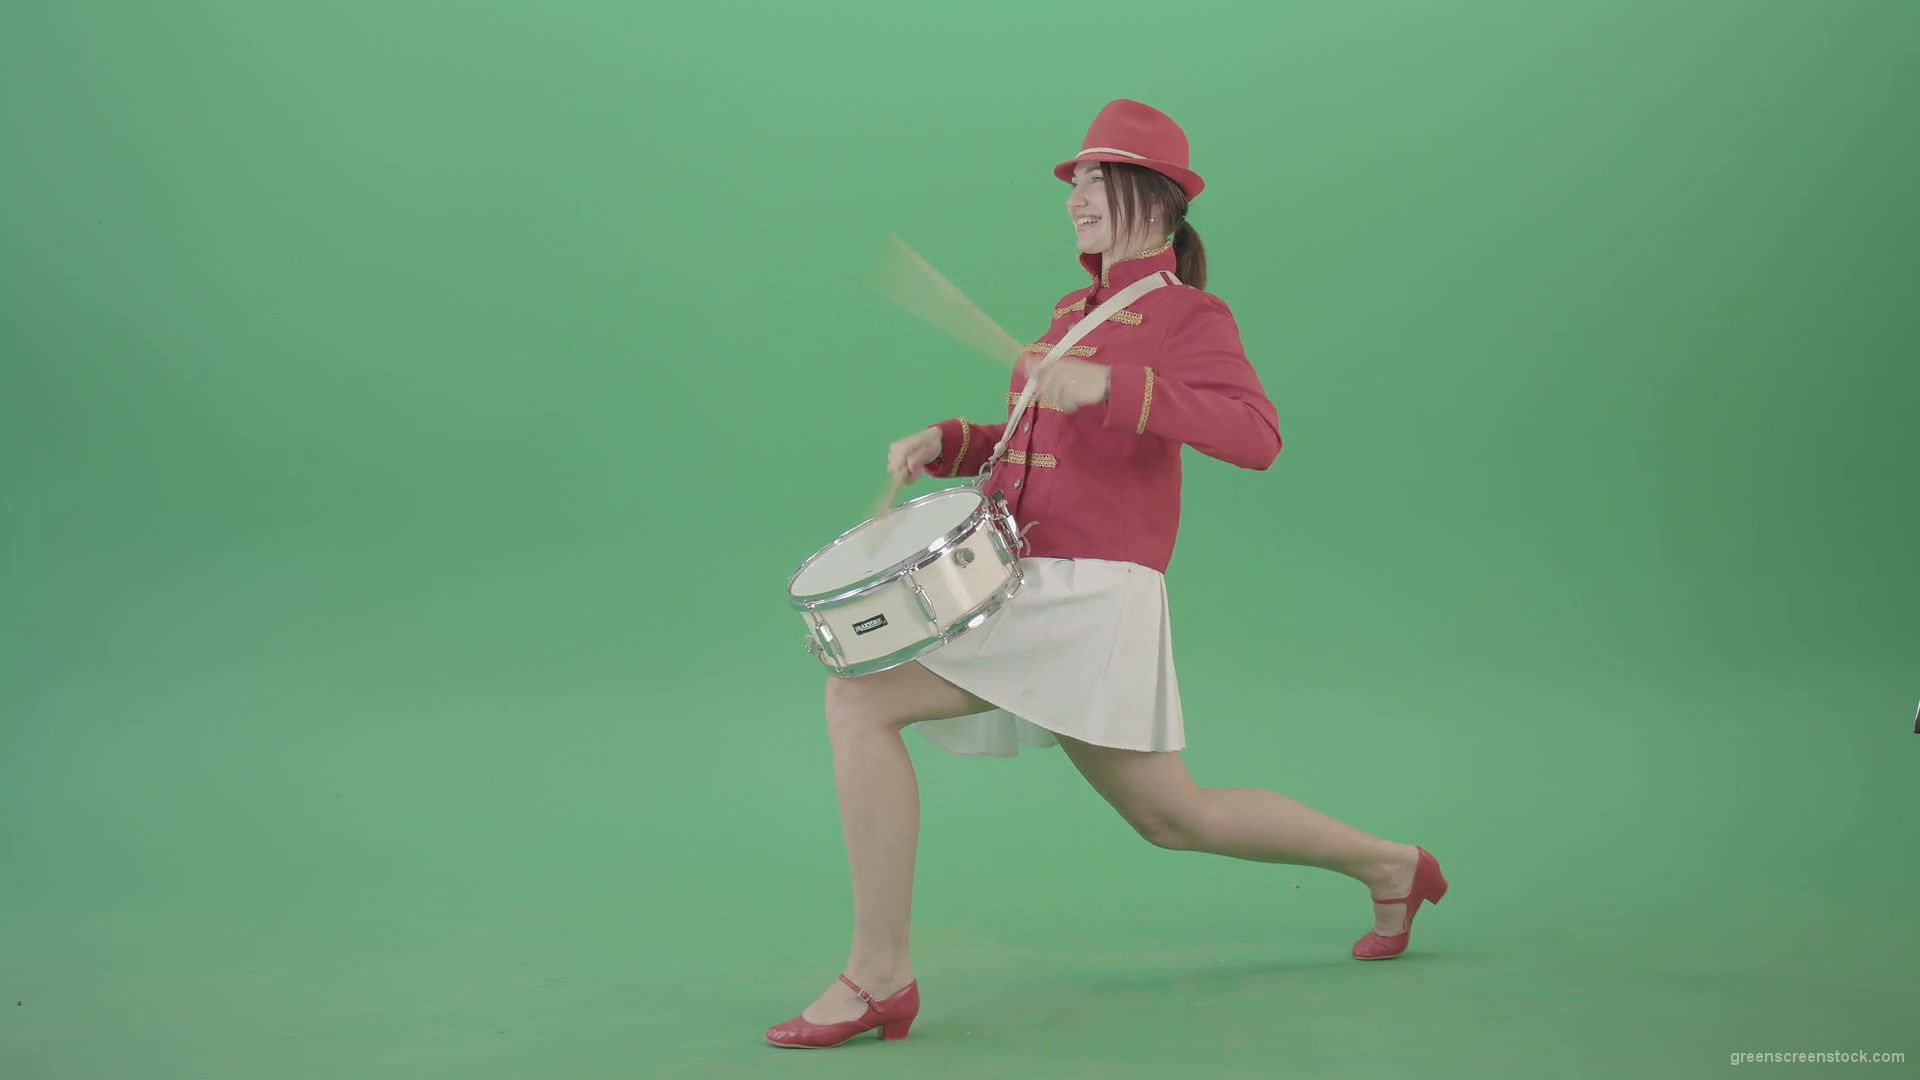 Stupid-funny-advertising-video-footage-with-drumming-girl-isolated-on-green-screen-4K-Video-Footage-1920_008 Green Screen Stock